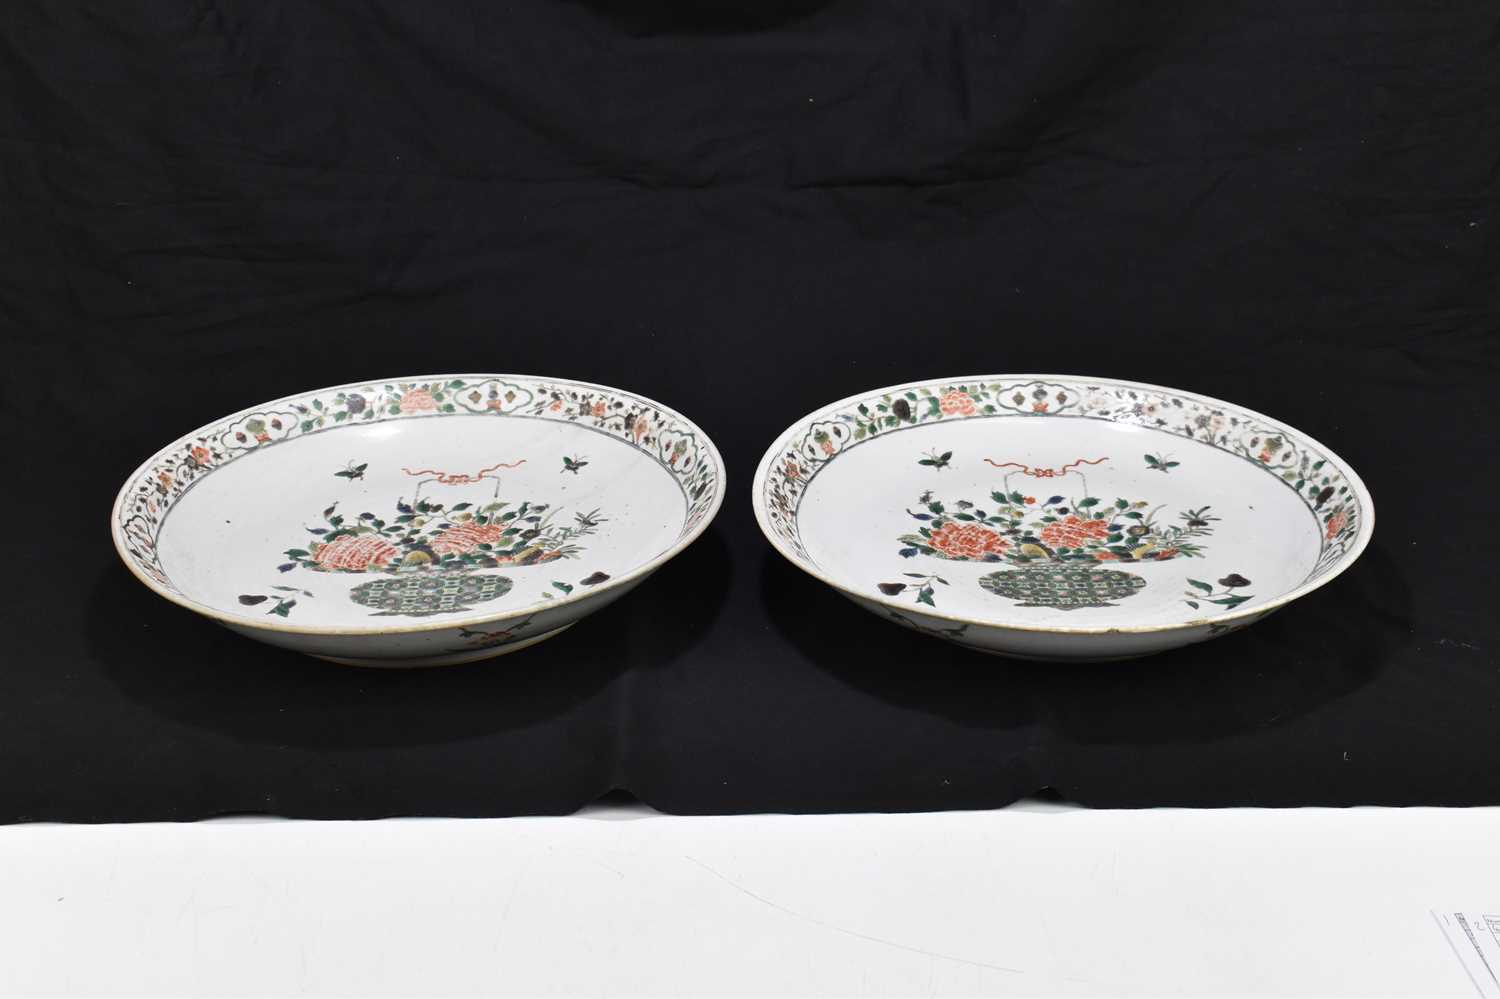 A pair of large Kangxi (1662-1722) Famille Verte chargers, each painted with a central vase of - Image 8 of 8